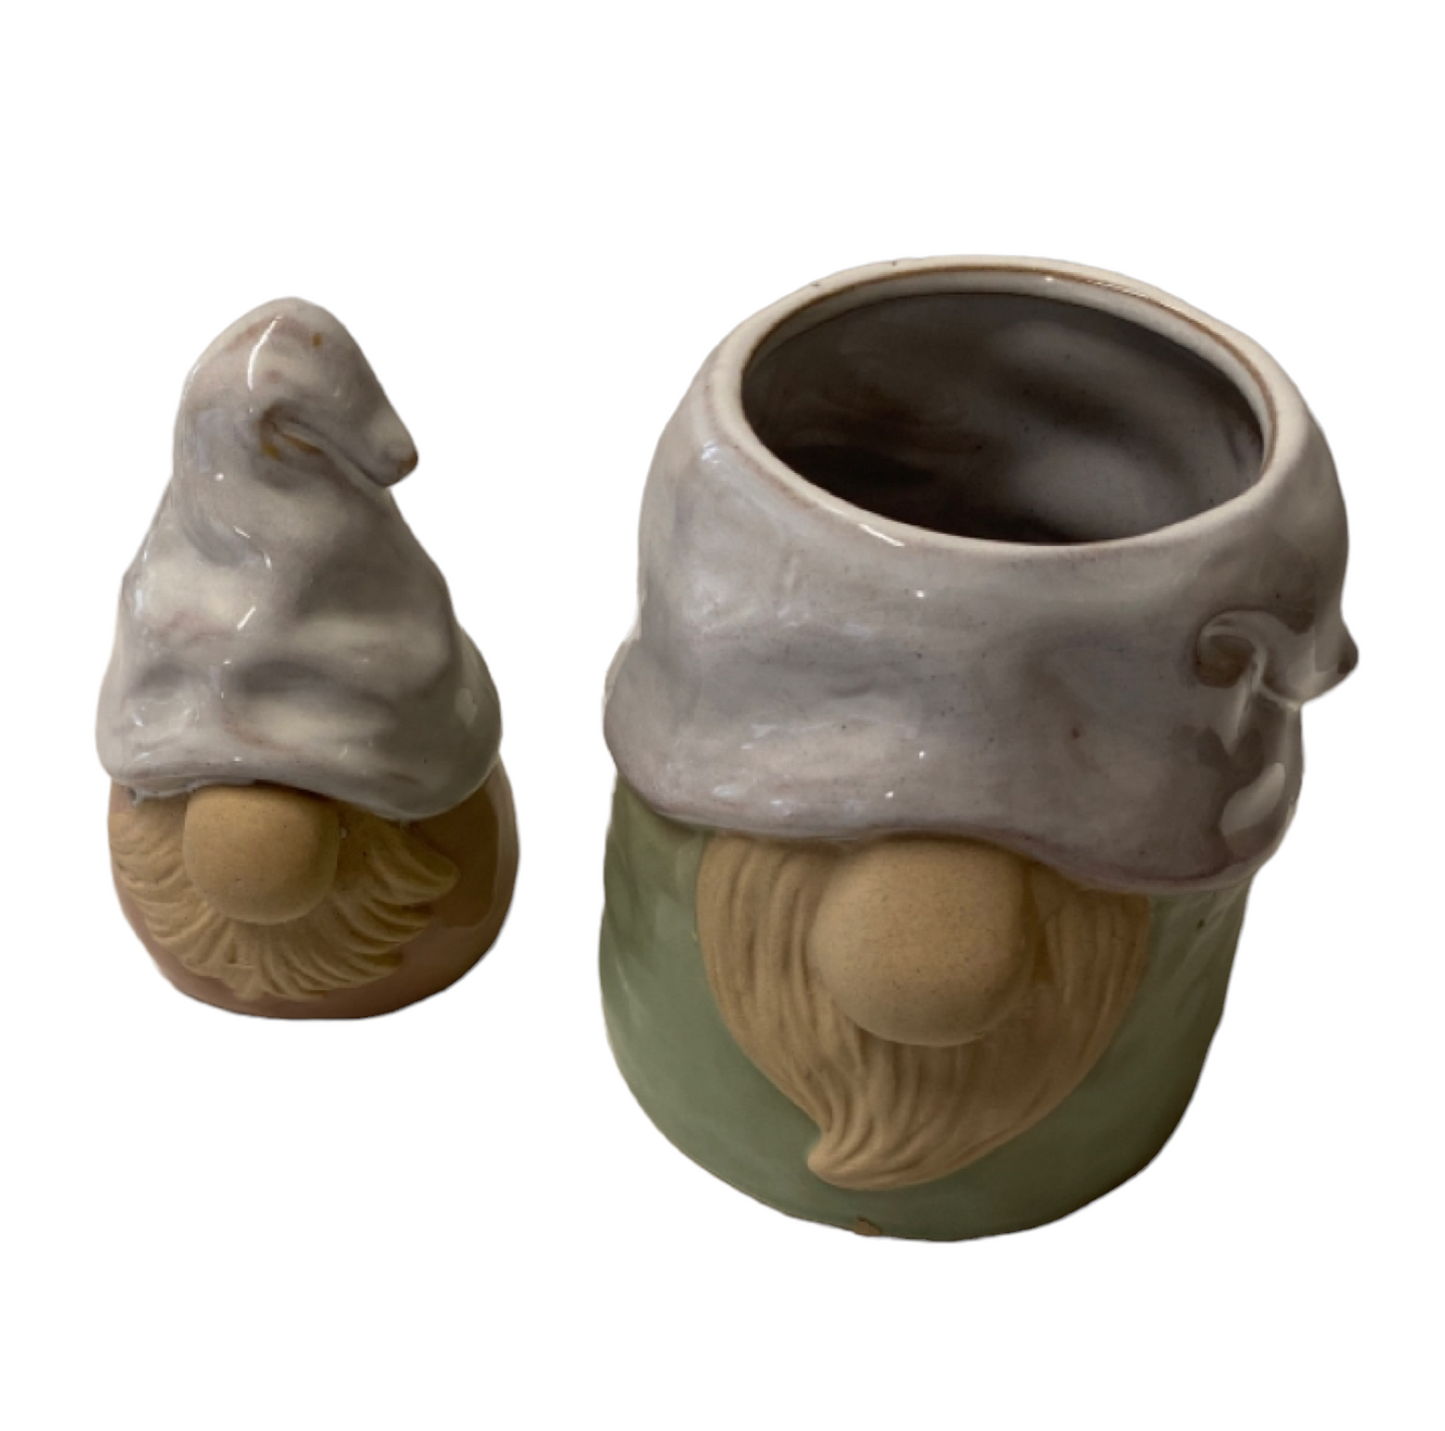 Gnome Set of 2 Pot Planter Plant Garden - The Renmy Store Homewares & Gifts 